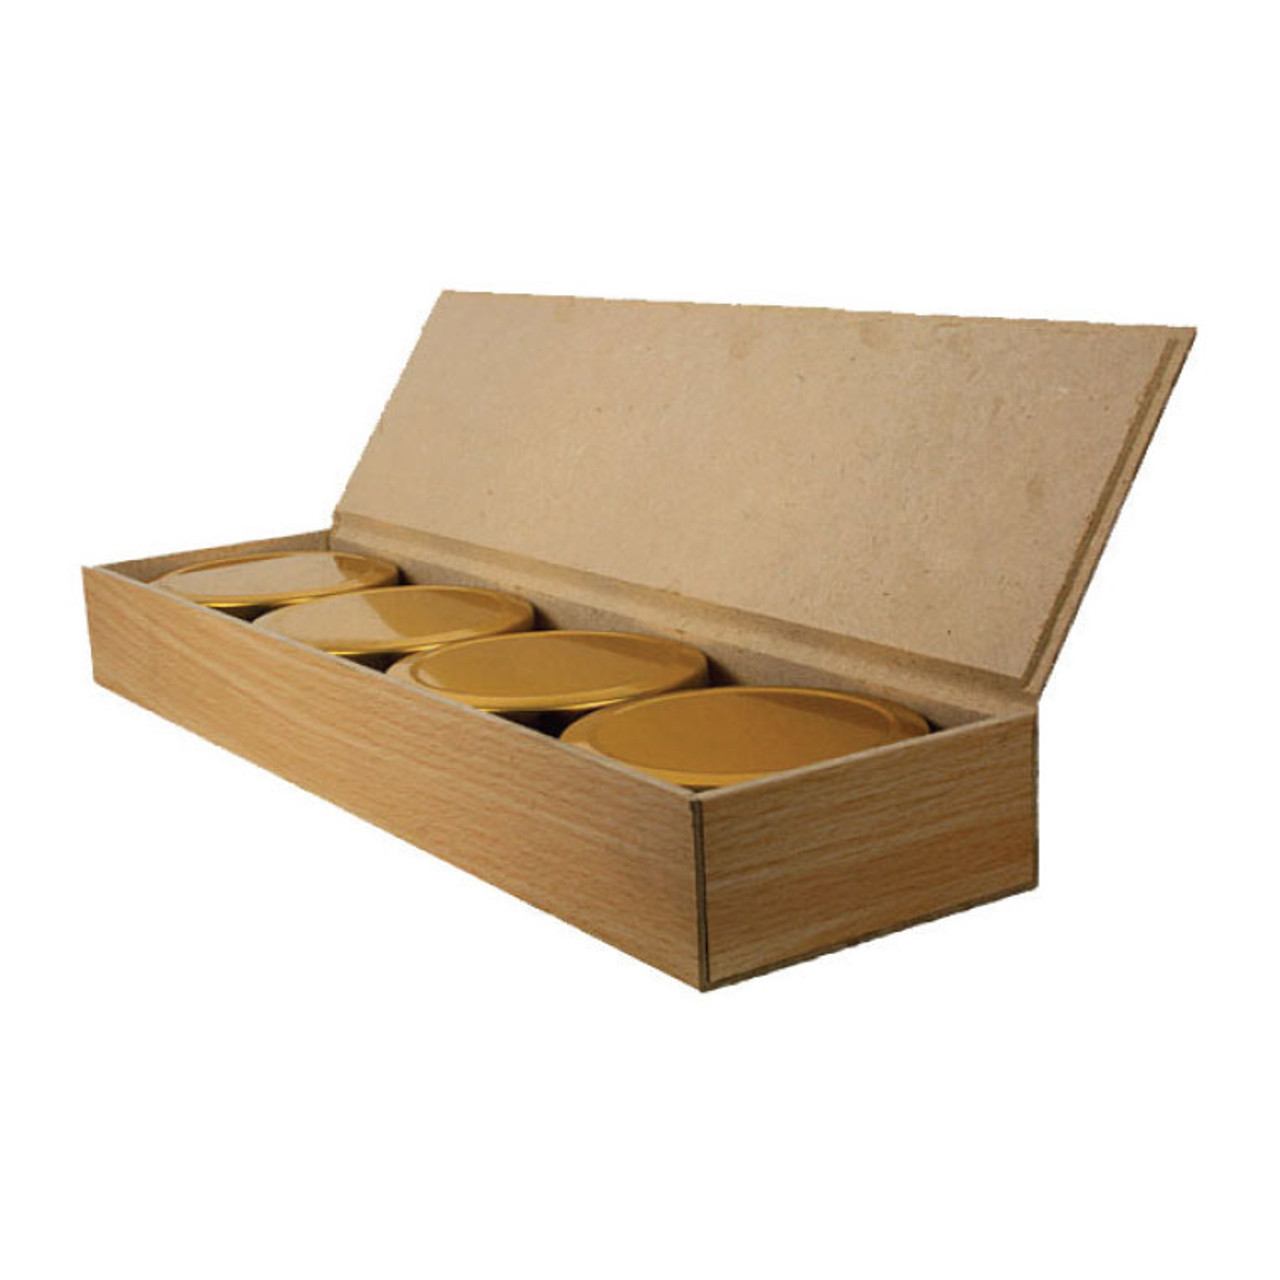 Wooden Gift Box With 4 Gold Cans - 60 pcs Per Case